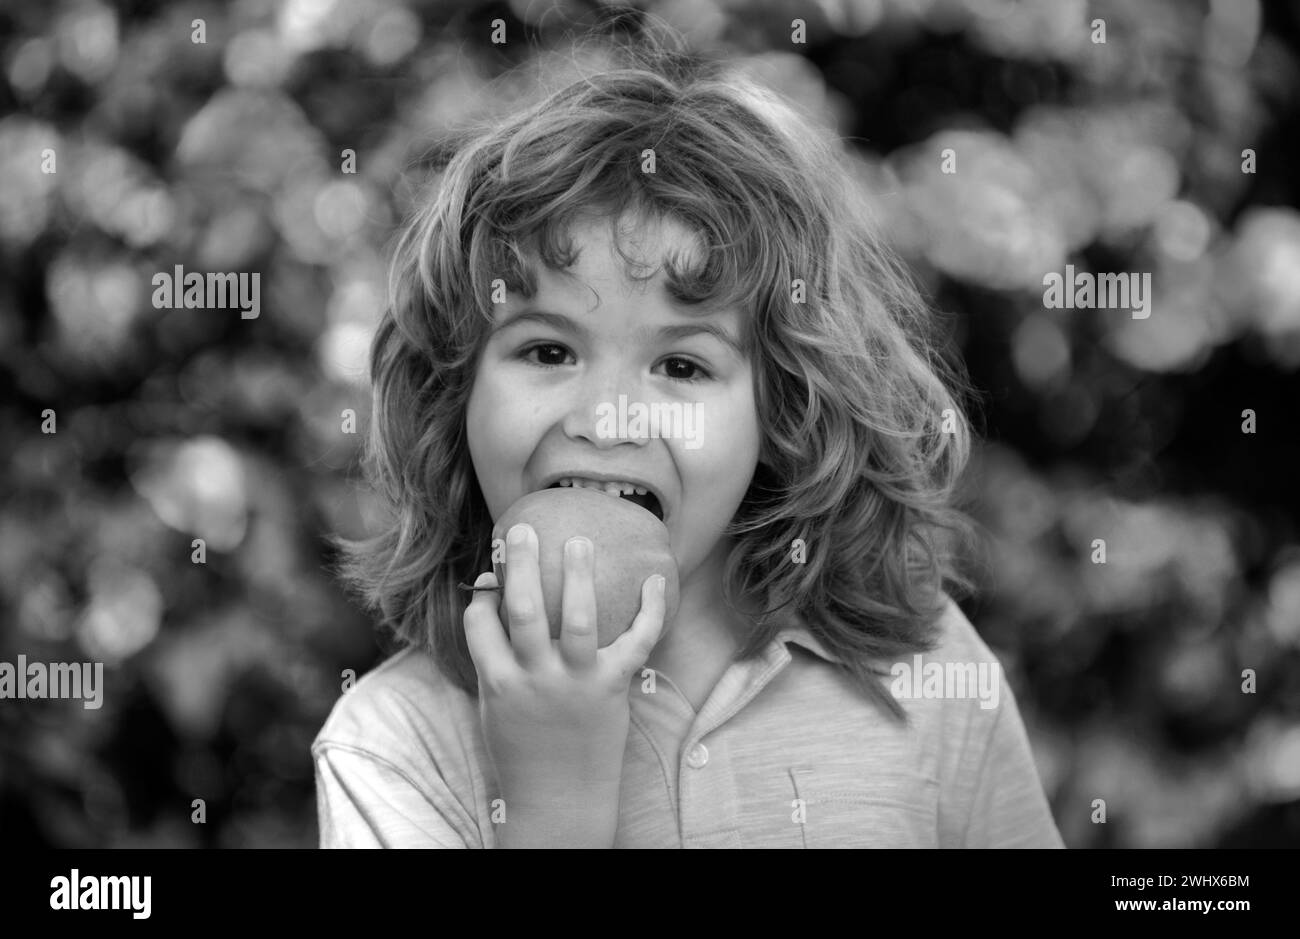 Little cute child eating green apple. Portrait of kid eating and biting an apple. Enjoy eating moment. Healthy food and kid concept. Stock Photo